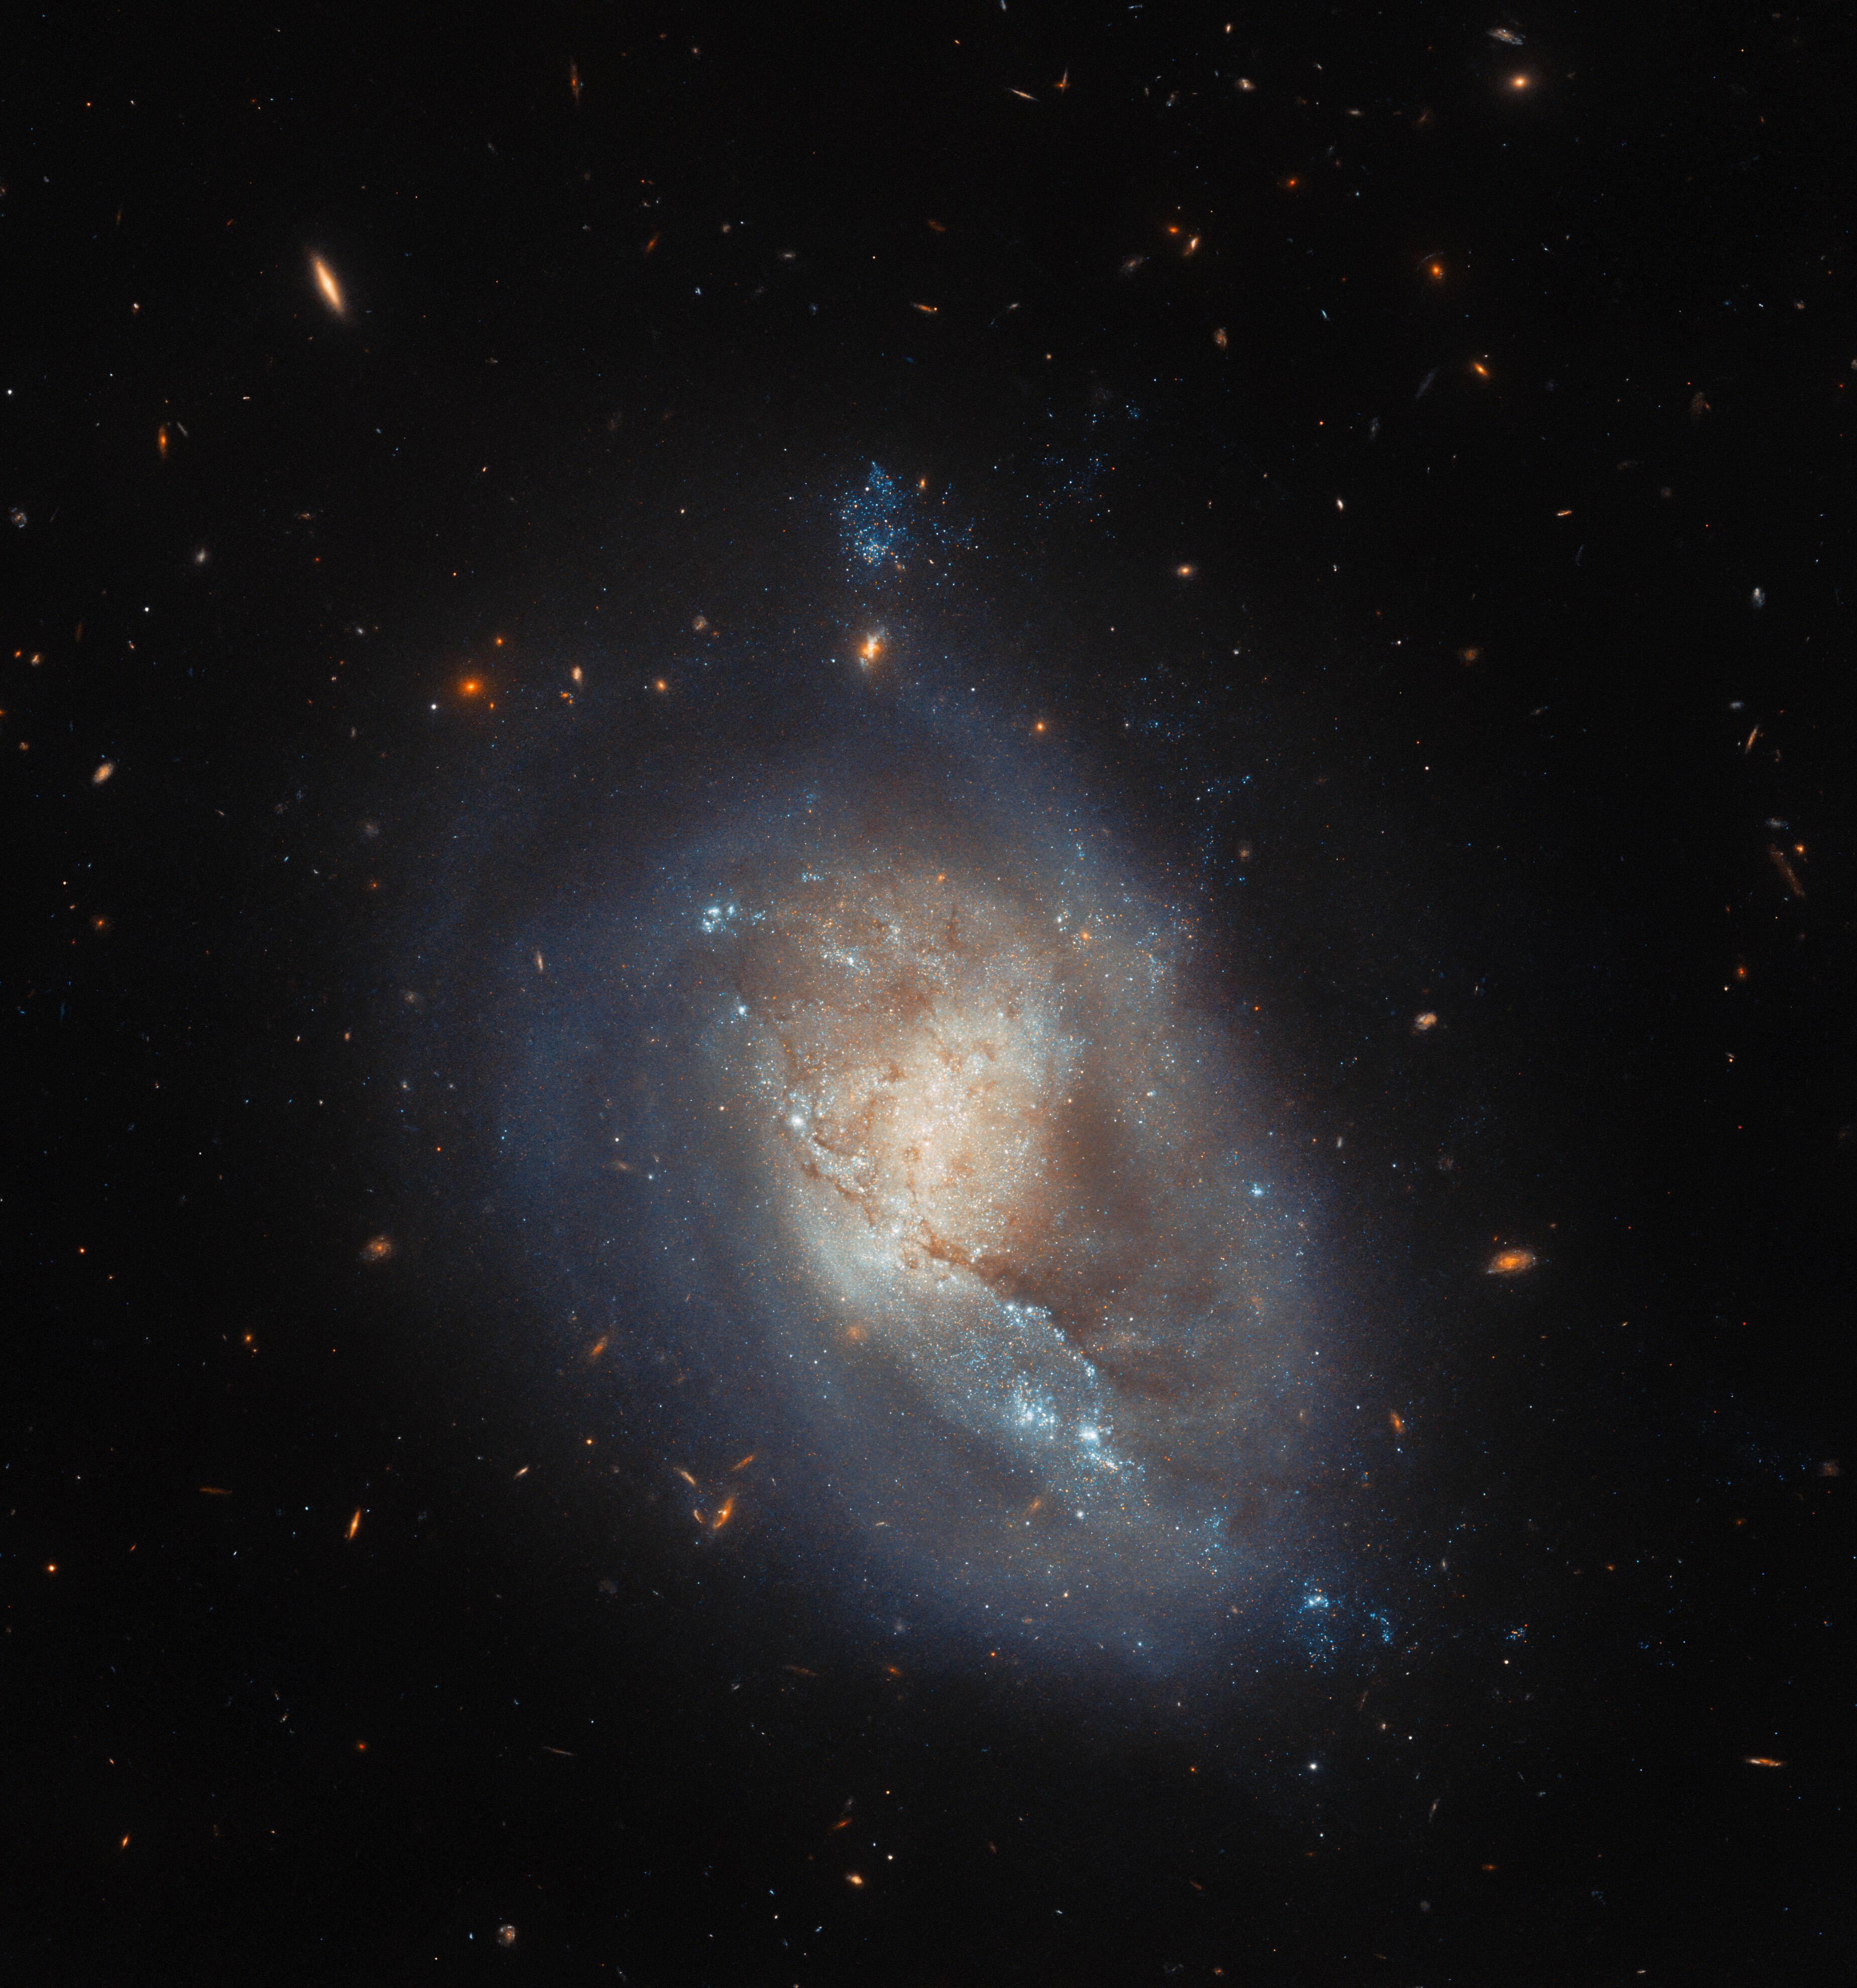 Hubble Views an Active Star-Forming Galaxy